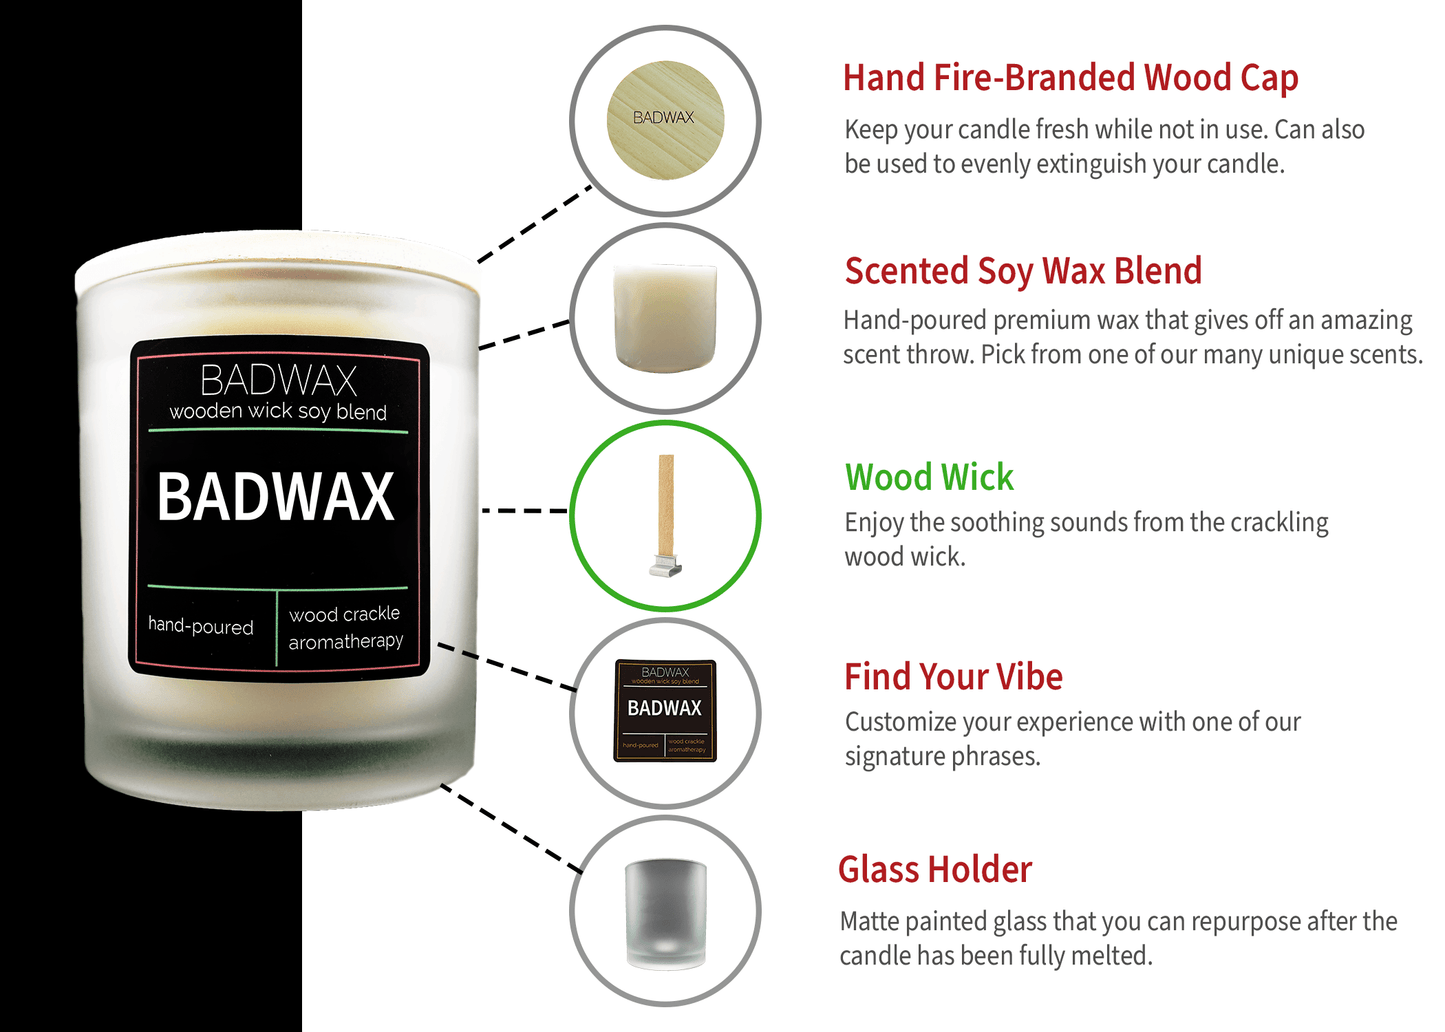 I Hid Your Present In Deez Nutz - Woodwick Candle - BADWAX